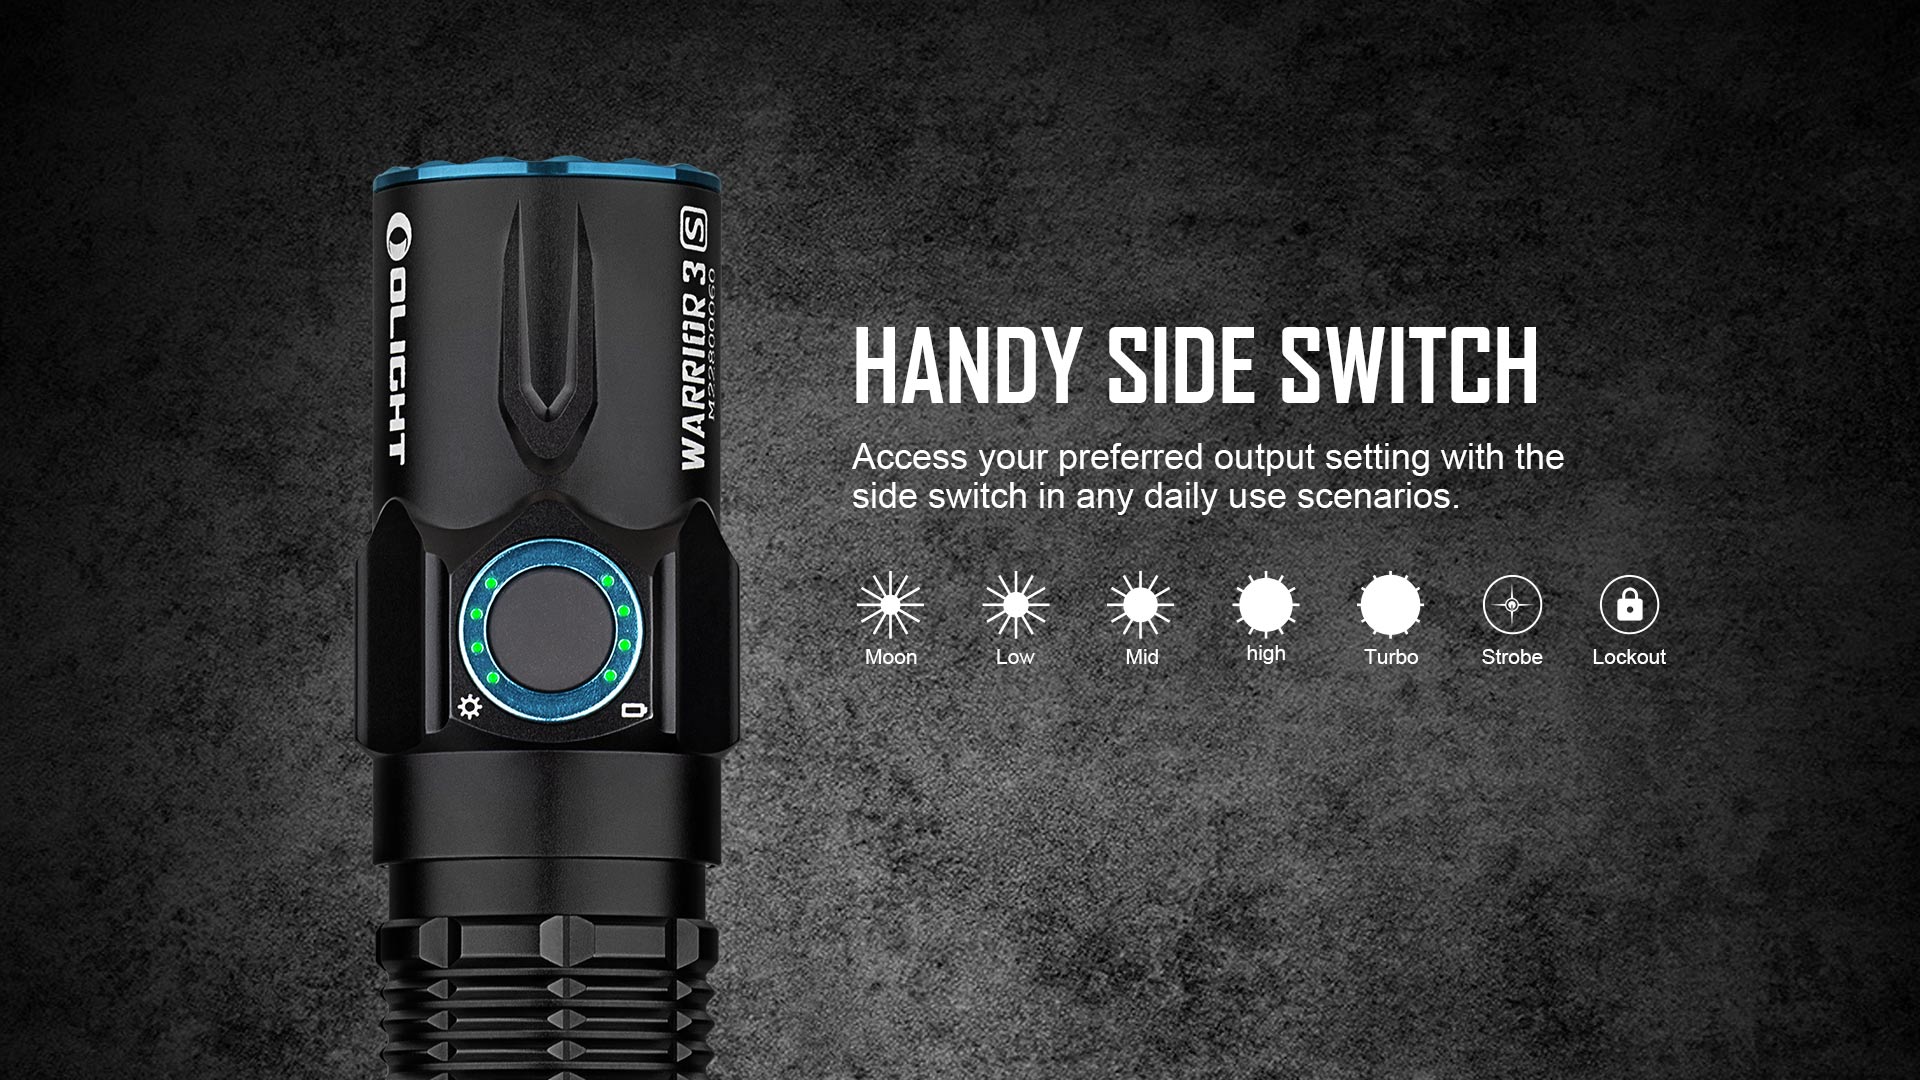 Olight Warrior 3S Rechargeable Tactical Flashlight | 1000Lumens.ca